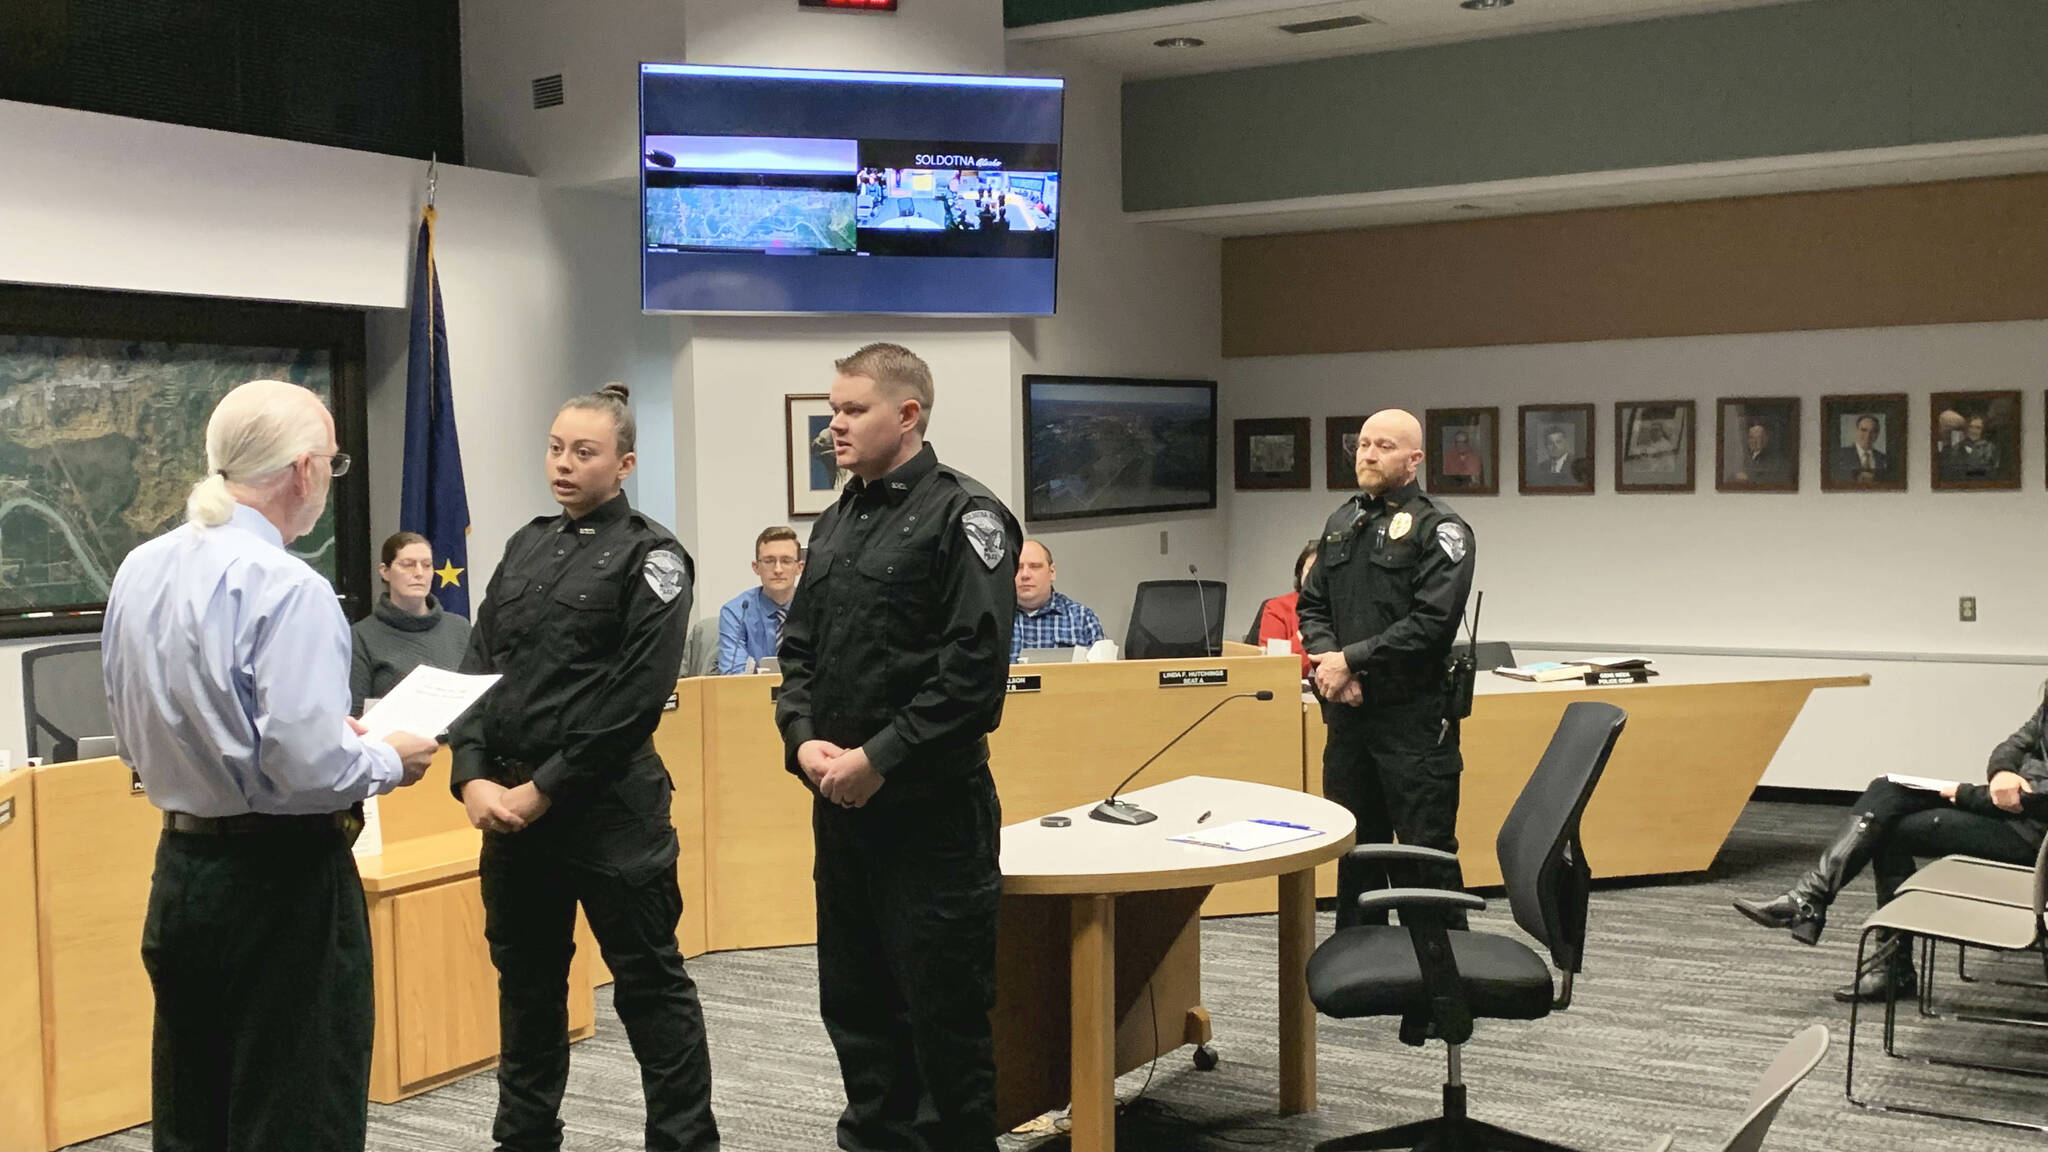 From left, Soldotna Mayor Paul Whitney swears in new Soldotna Police Officers AJ Fresquez and Reid Culver while Police Chief Dale "Gene" Meek looks on during a meeting of the Soldotna City Council on Wednesday, Nov. 9, 2022 in Soldotna, Alaska. (Ashlyn O'Hara/Peninsula Clarion)